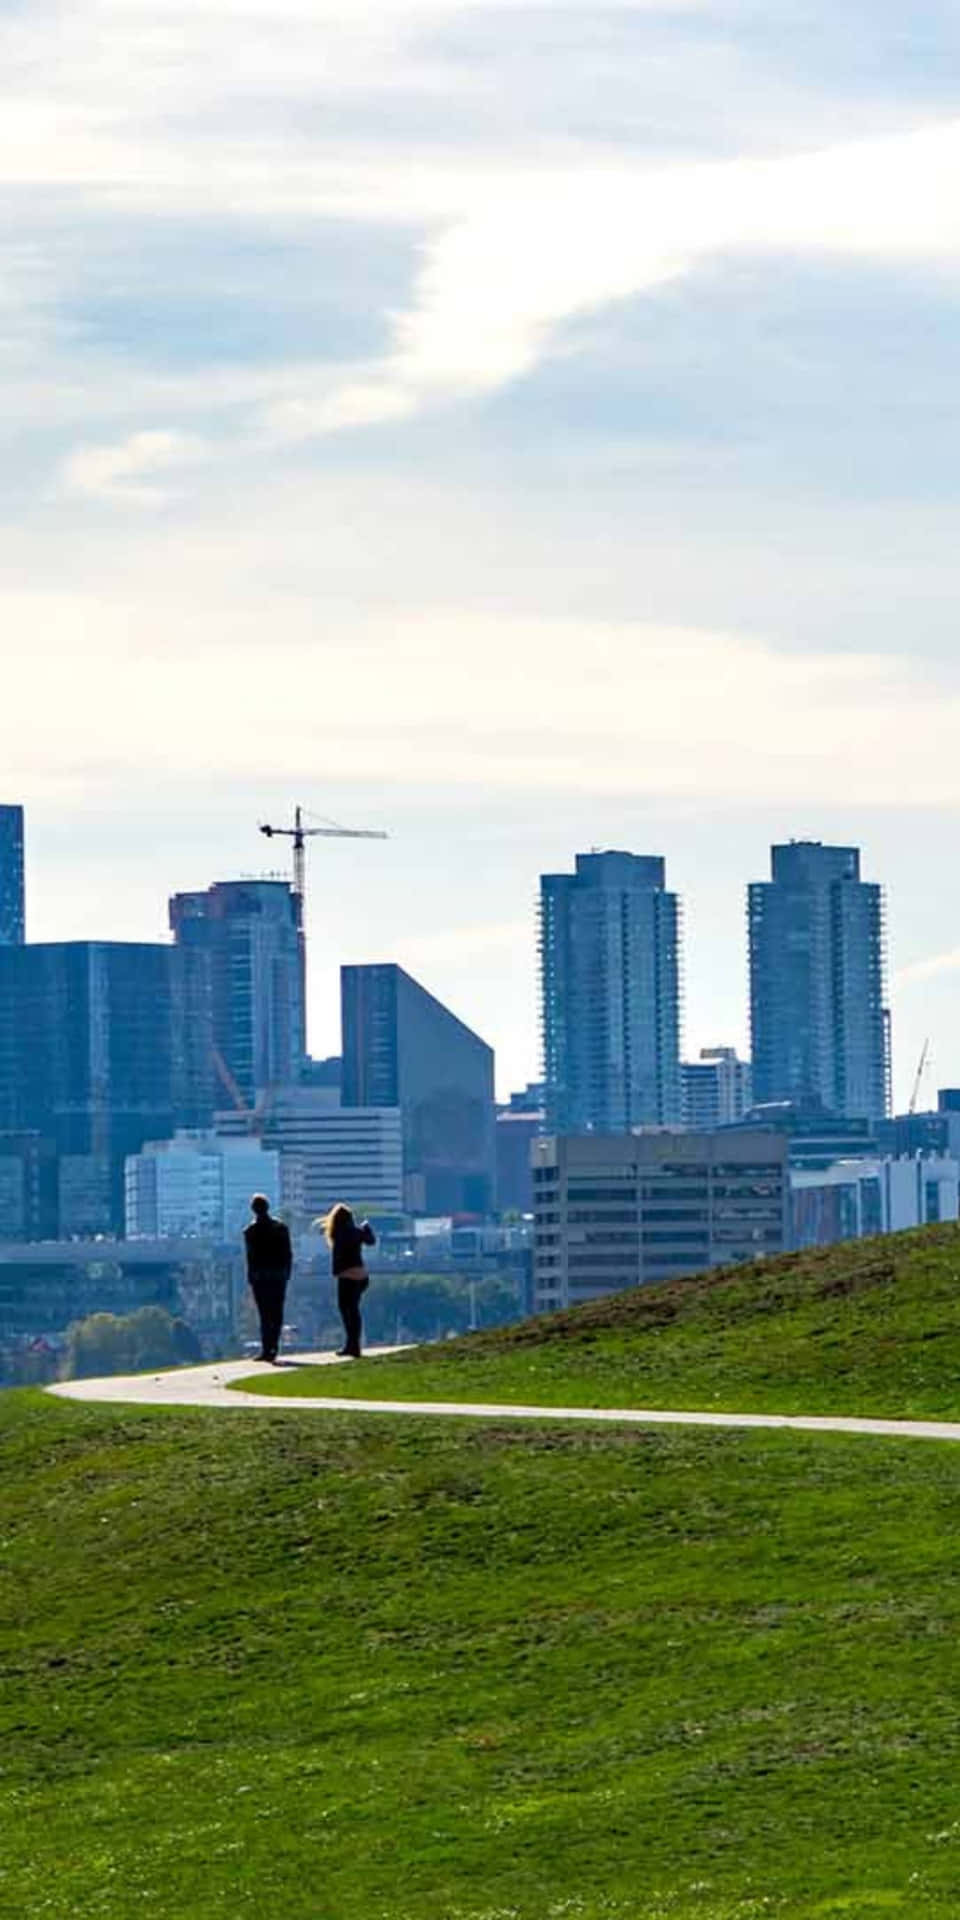 A City Skyline Is Seen From A Grassy Field